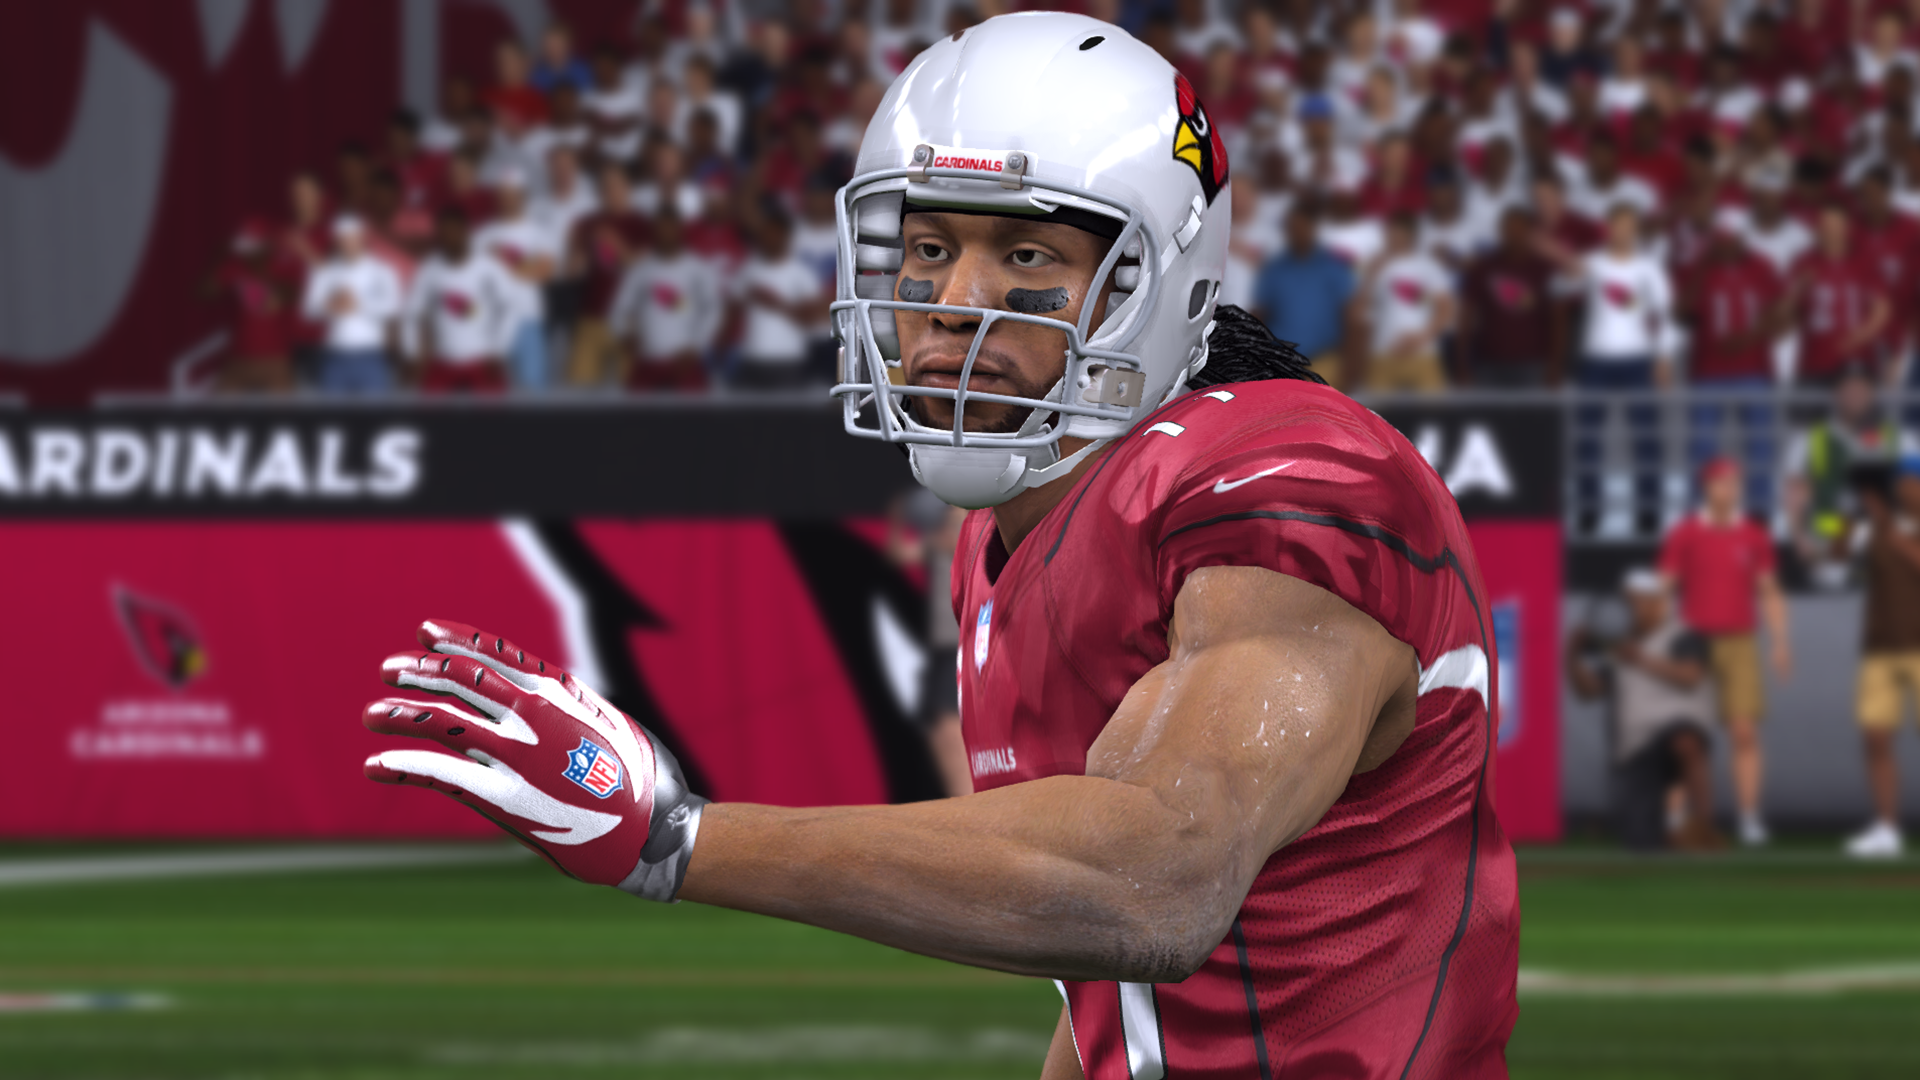 Icon for Larry Fitzgerald Legacy Award